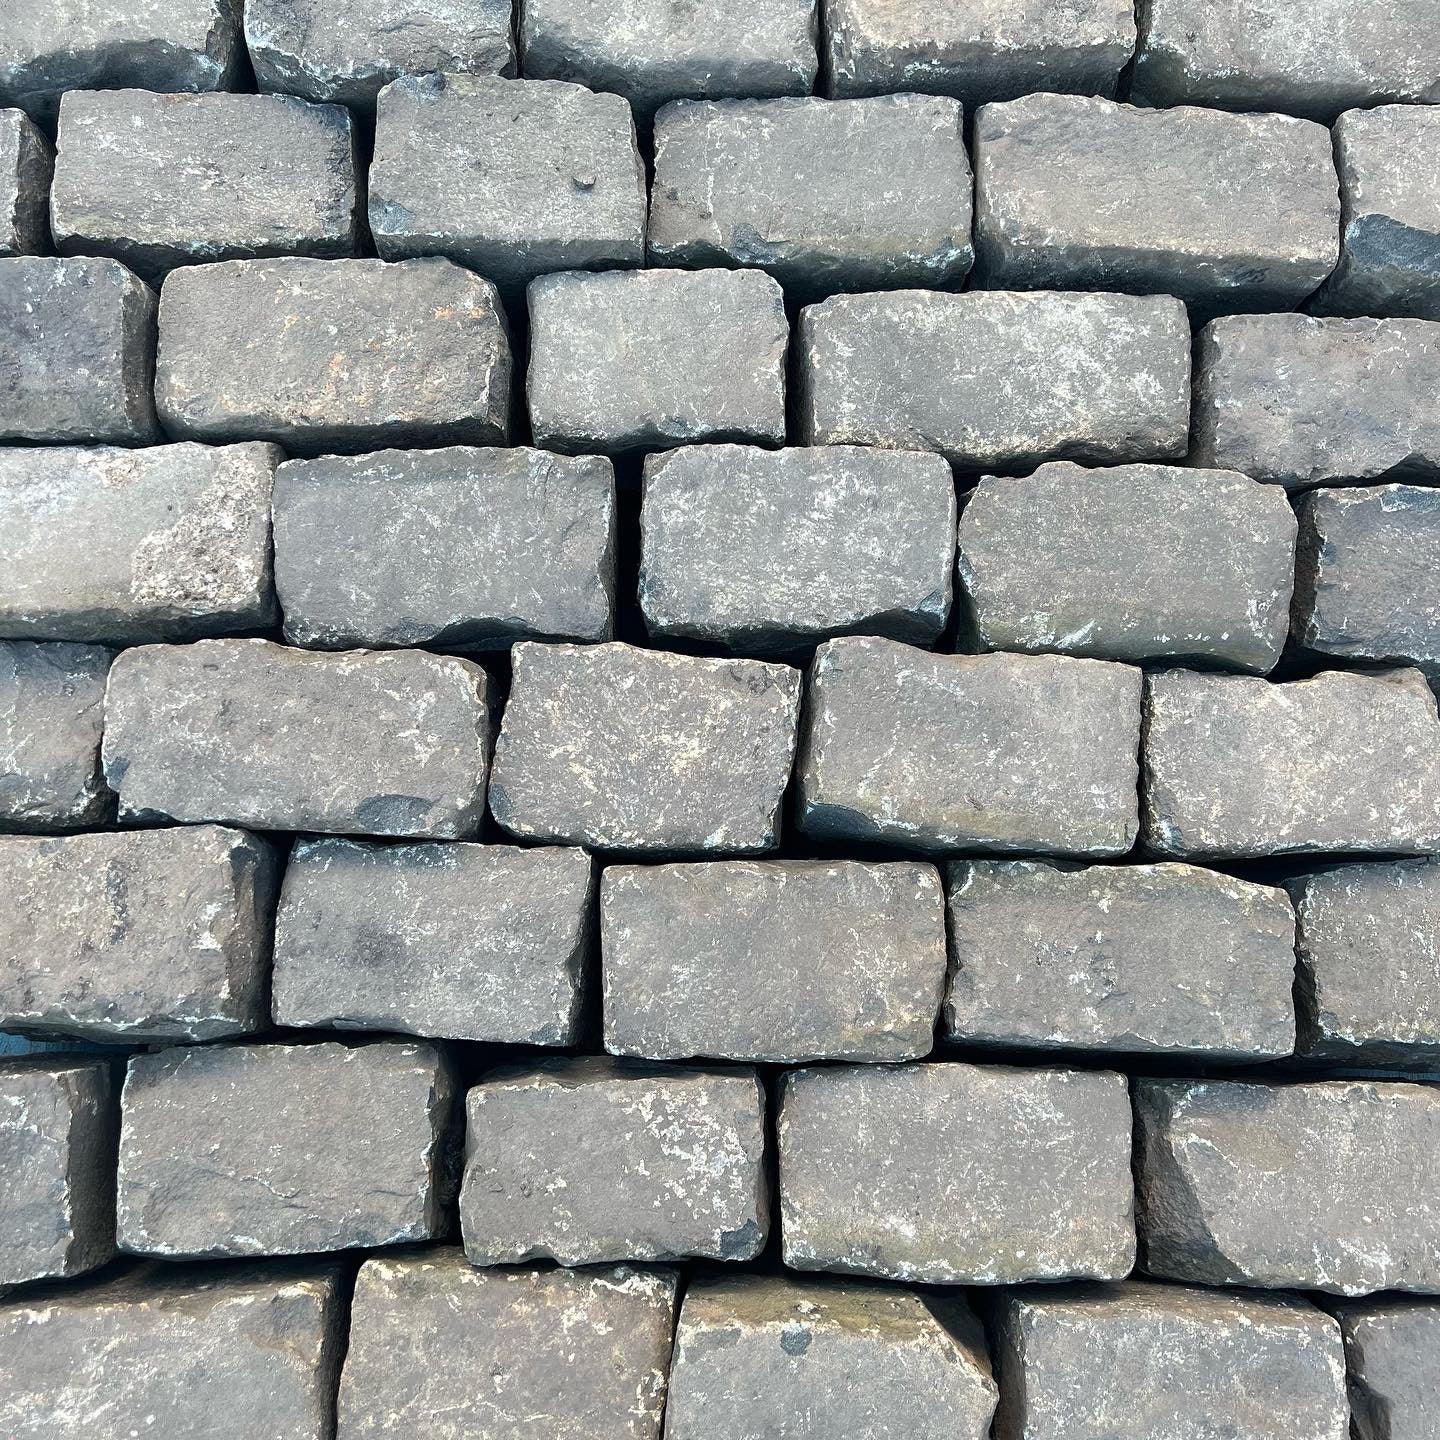 How To Lay A Reclaimed Granite Cobblestone Driveway - Reclaimed Brick Company